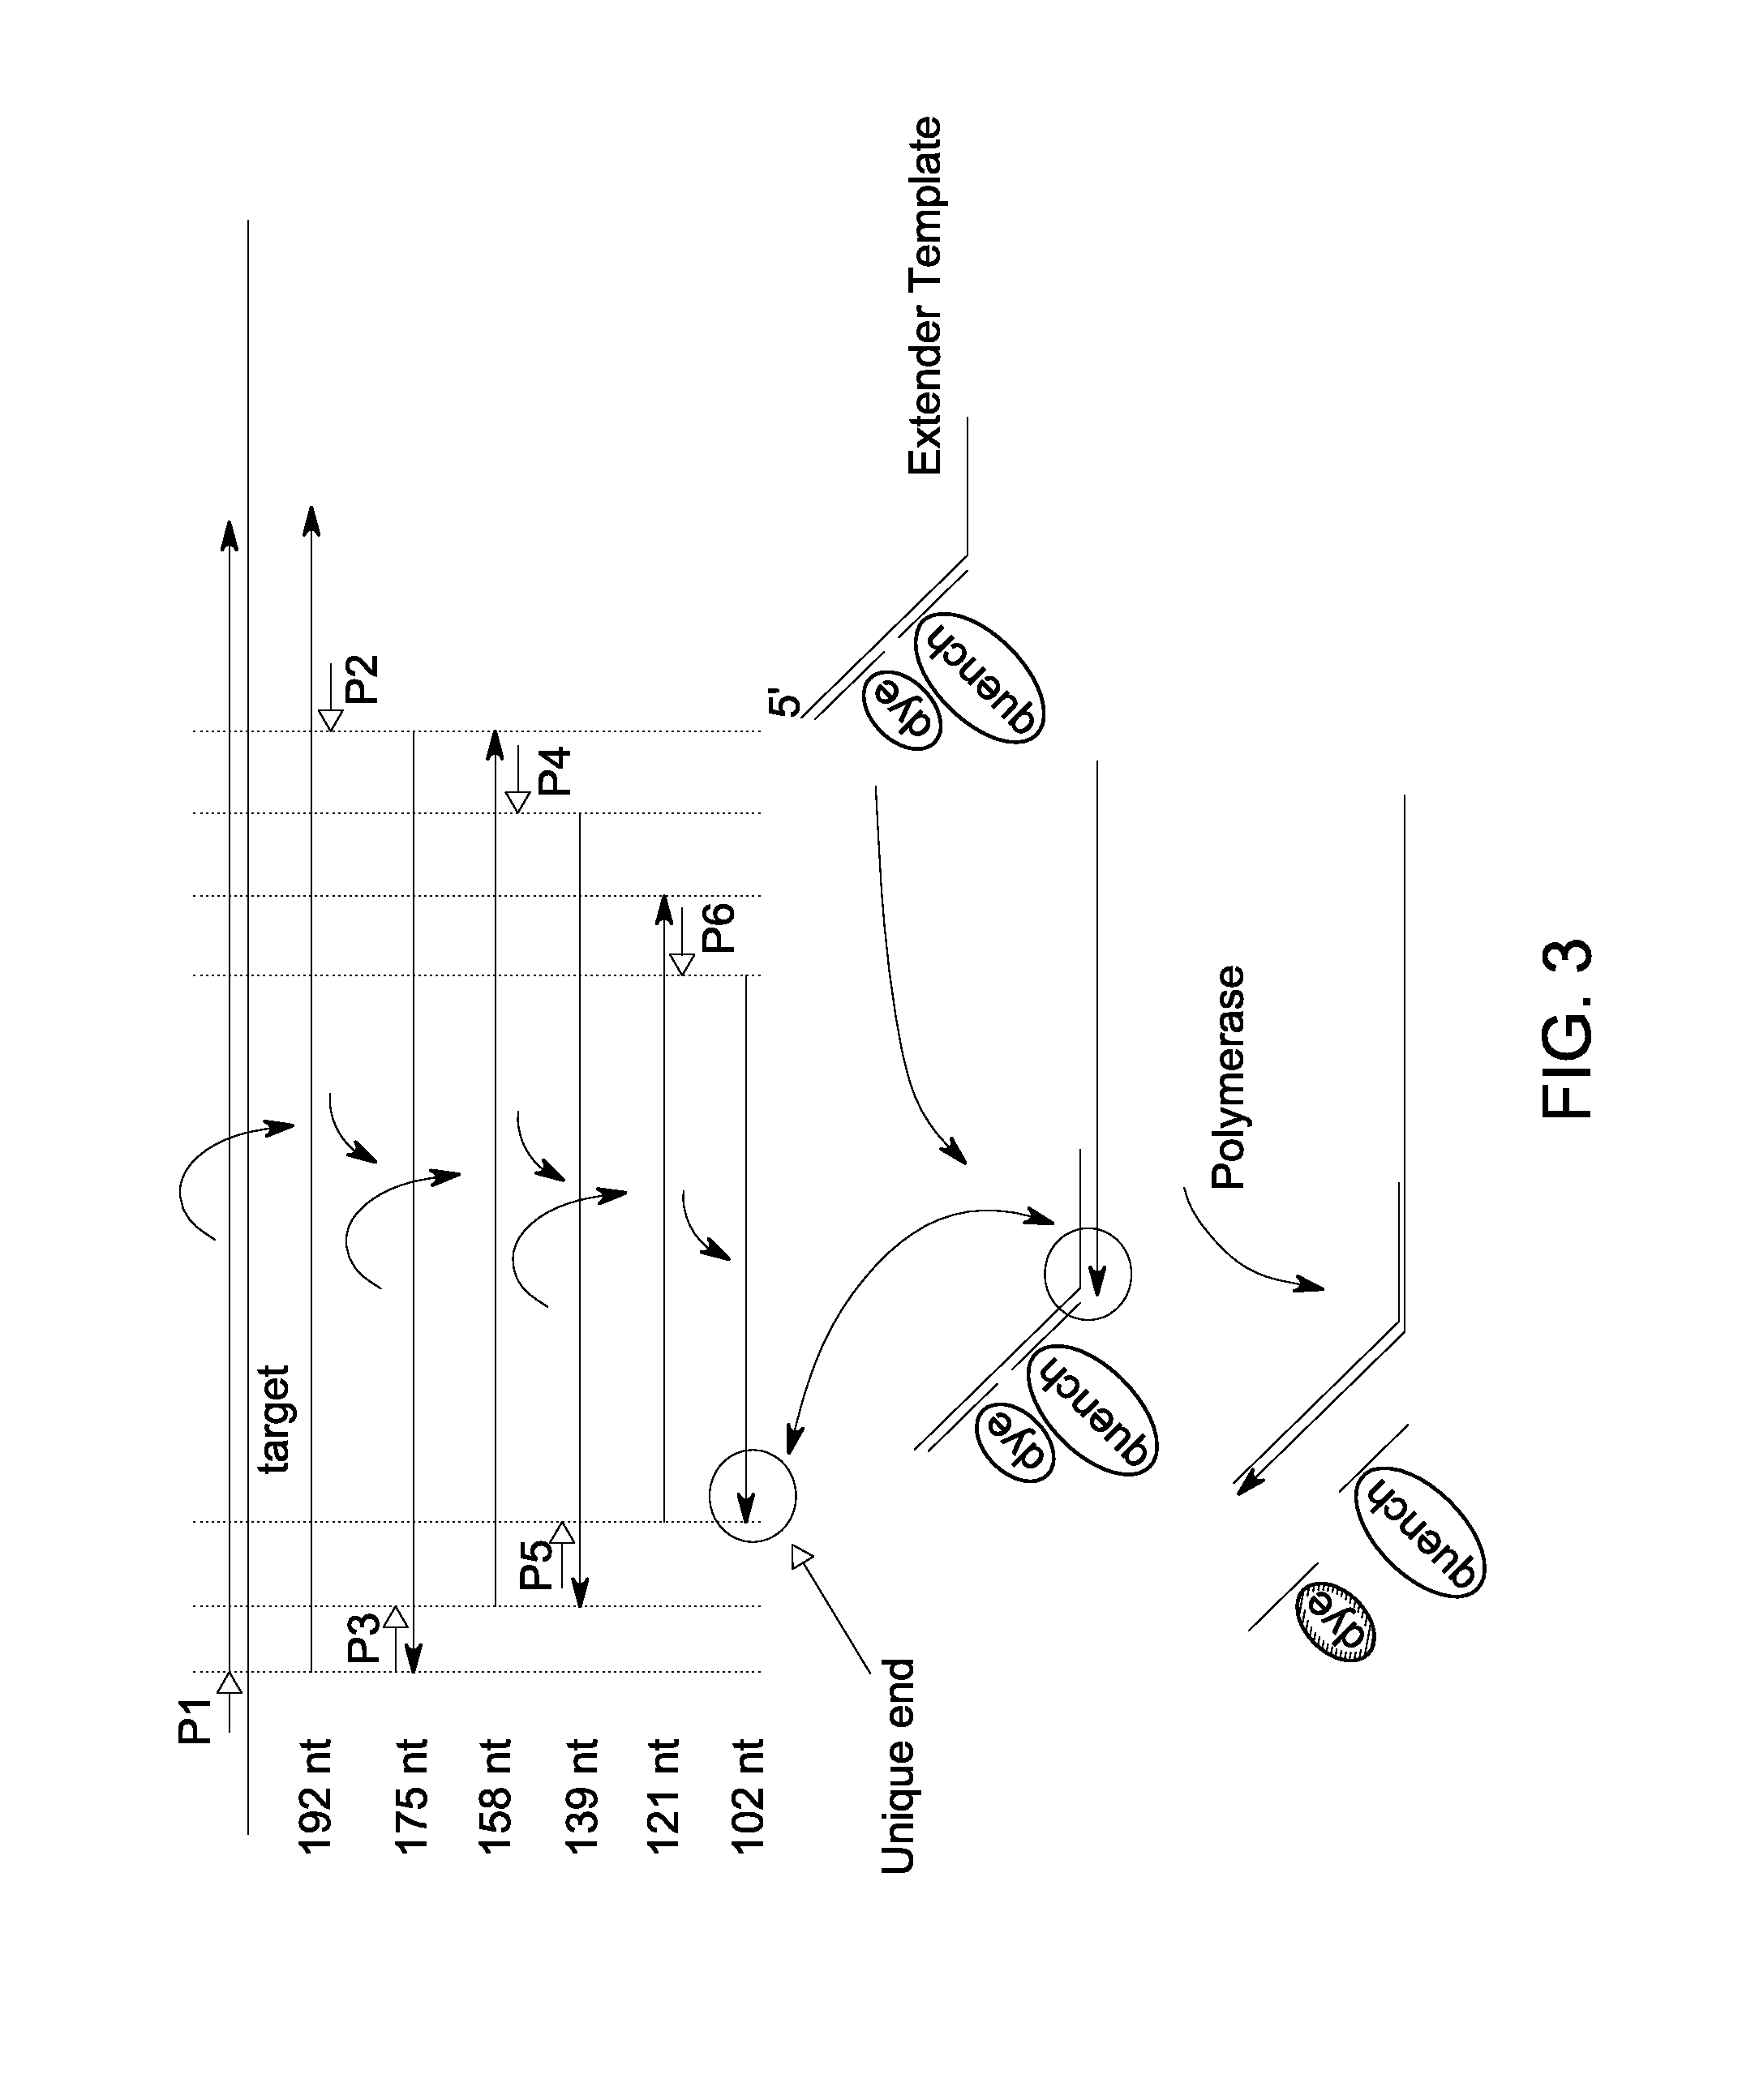 Mutant endonuclease v enzymes and applications thereof